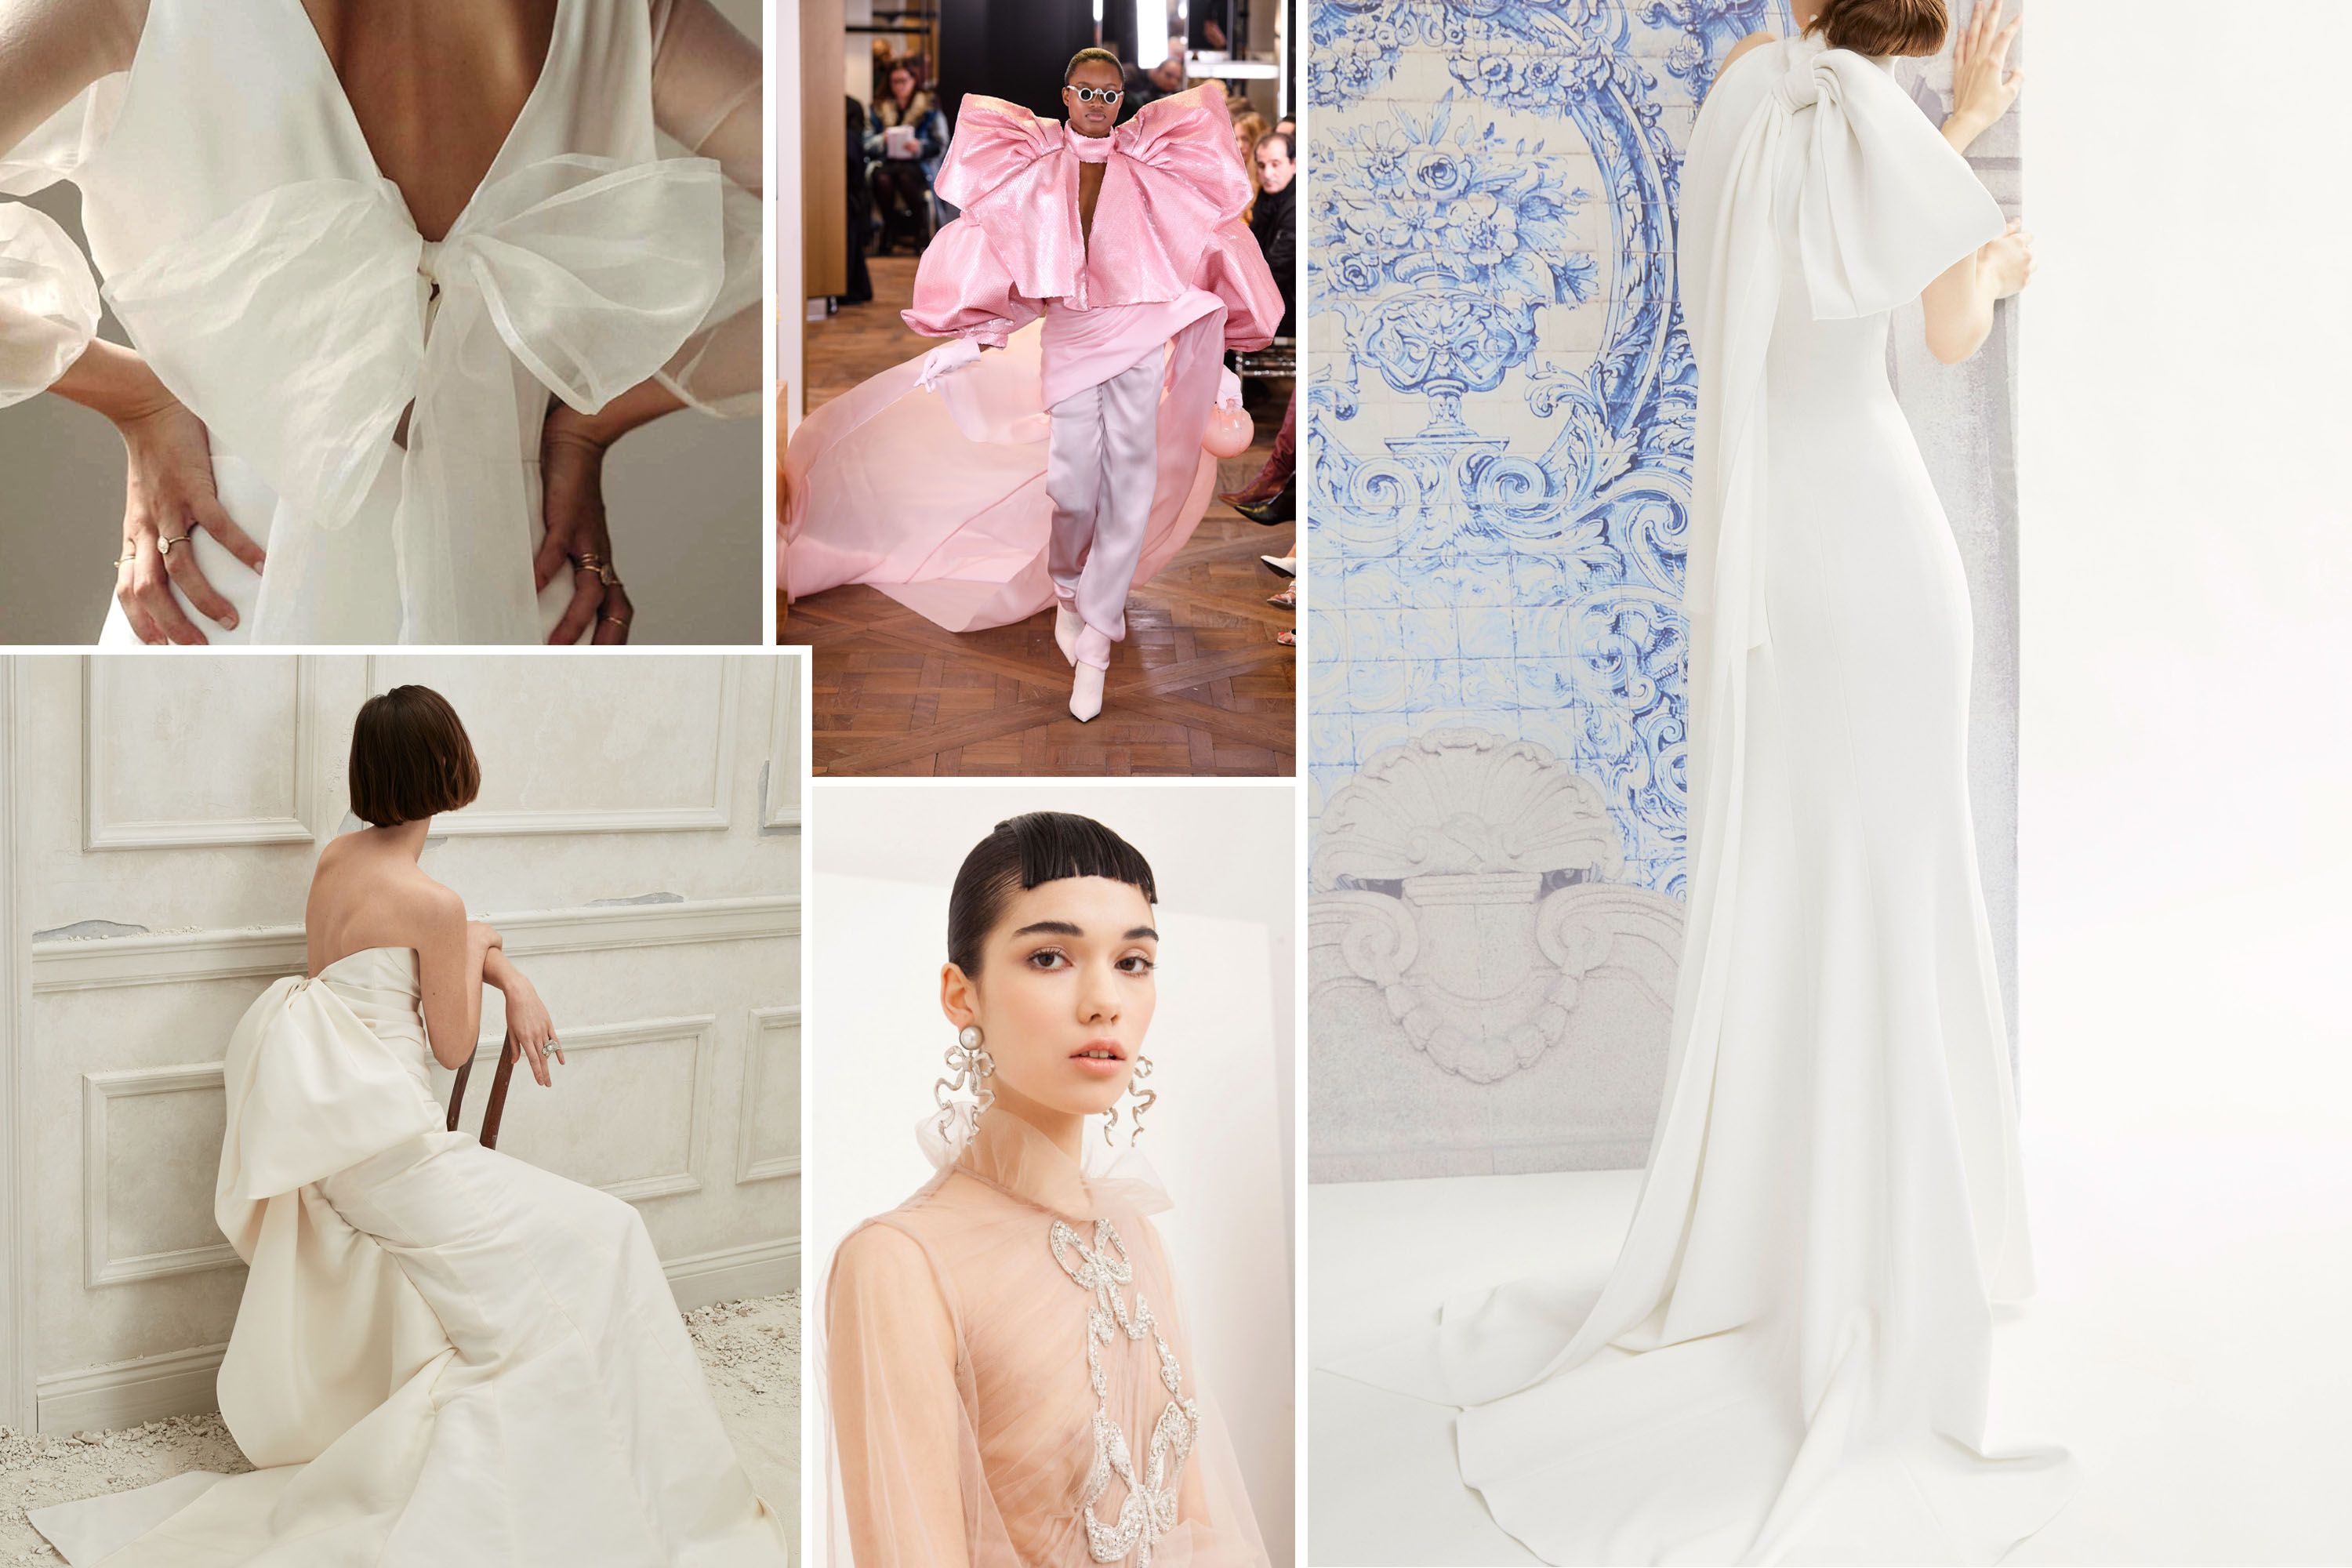 Top 5 Trends From New York Bridal Fashion Week 2021